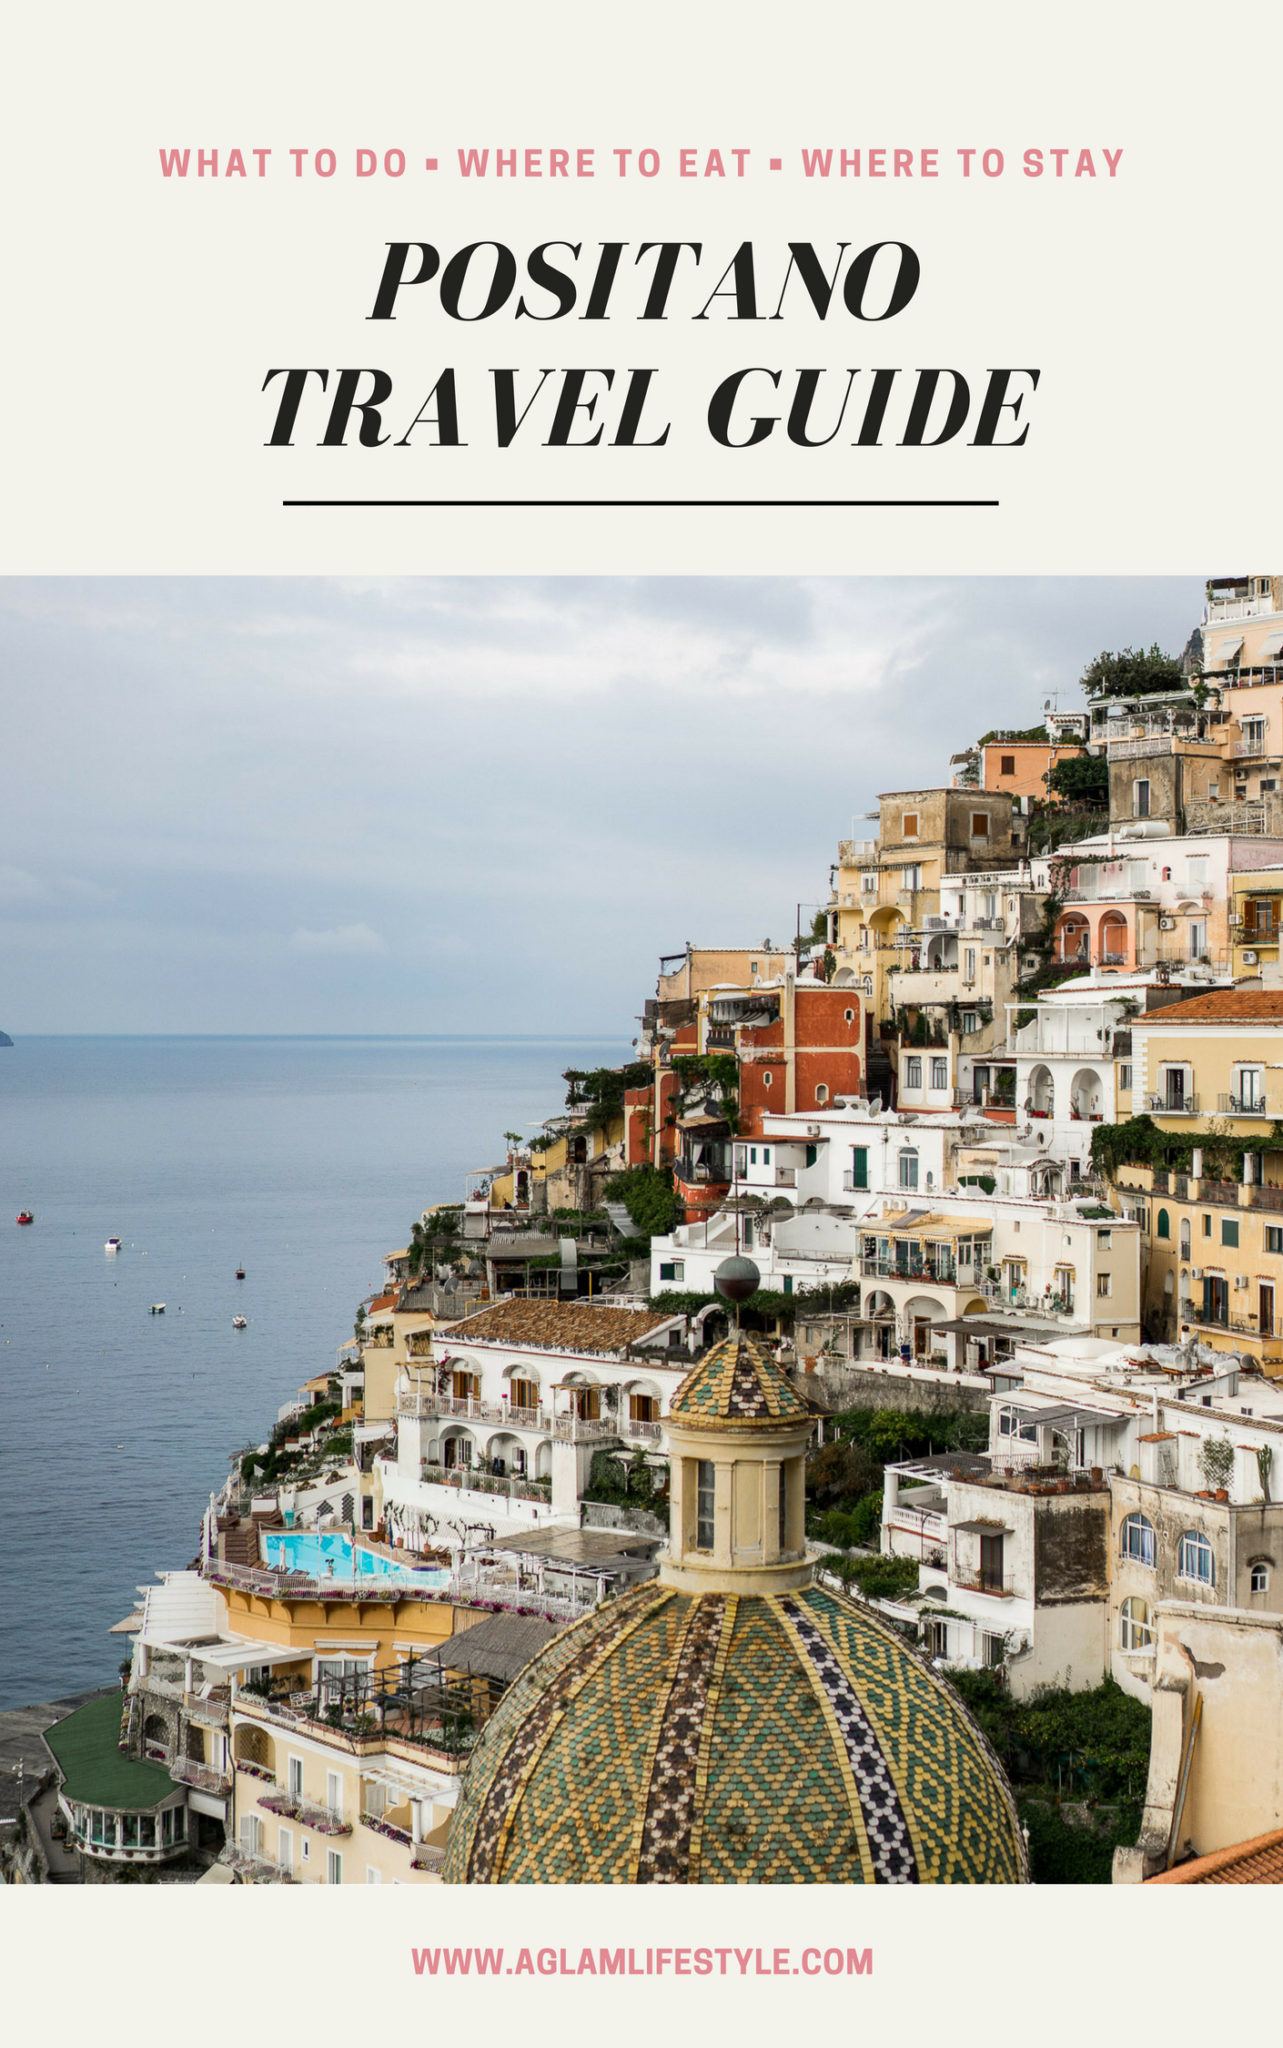 Positano Travel Guide - Best Things to do in Positano - A Glam Lifestyle